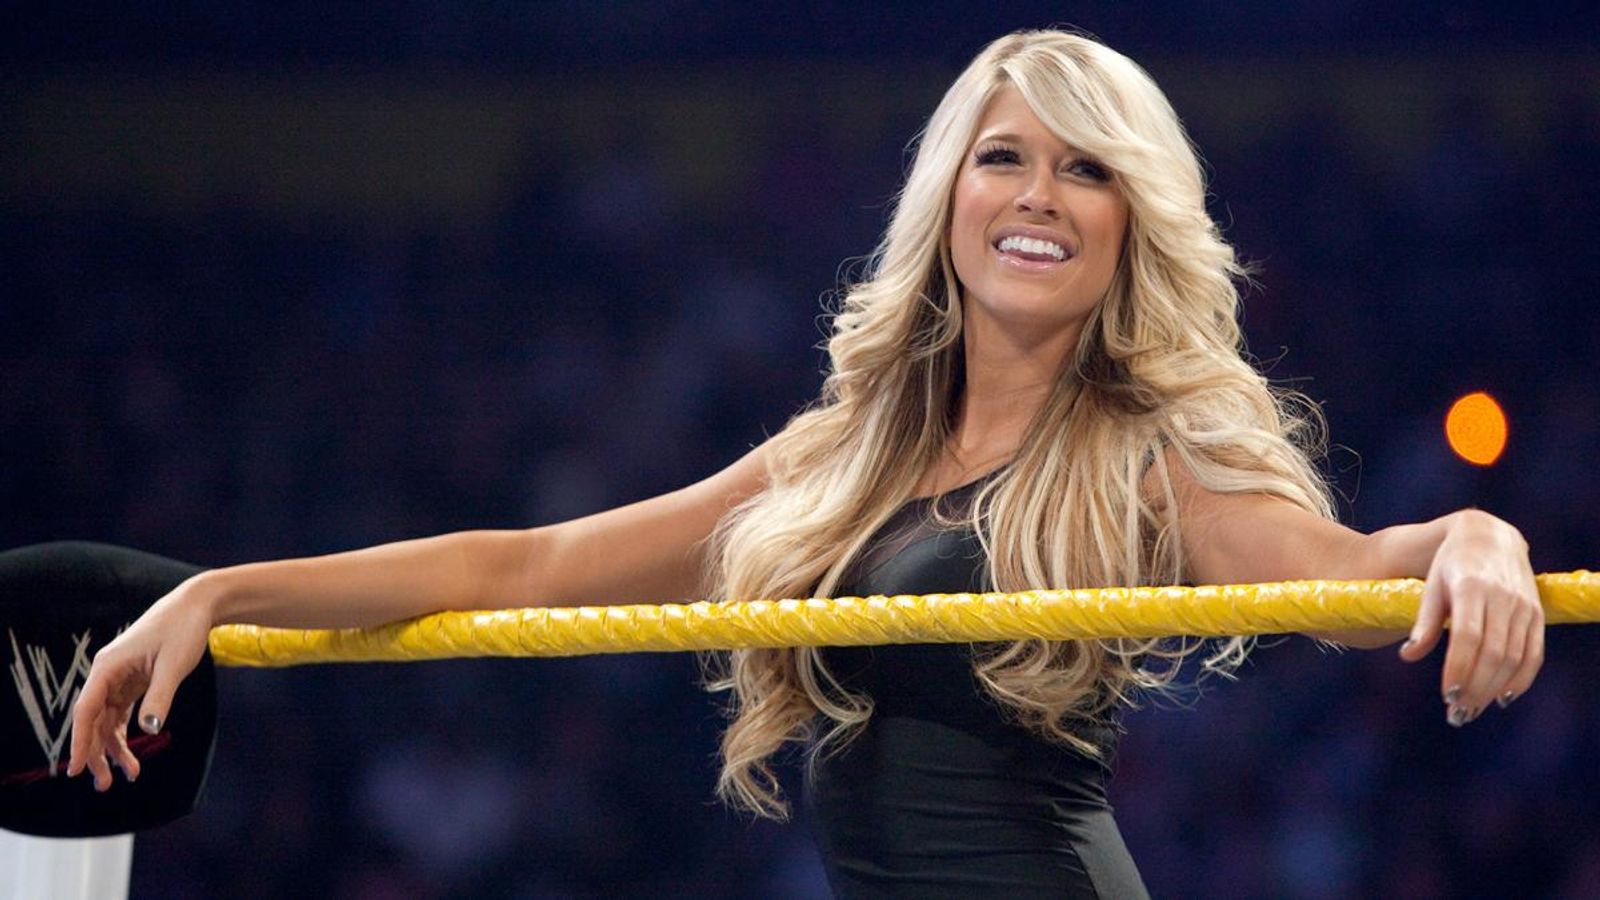 Wwe Kelly Kelly Confirms She Will Be At Wrestlemania 33 In Orlando Wwe News Sky Sports